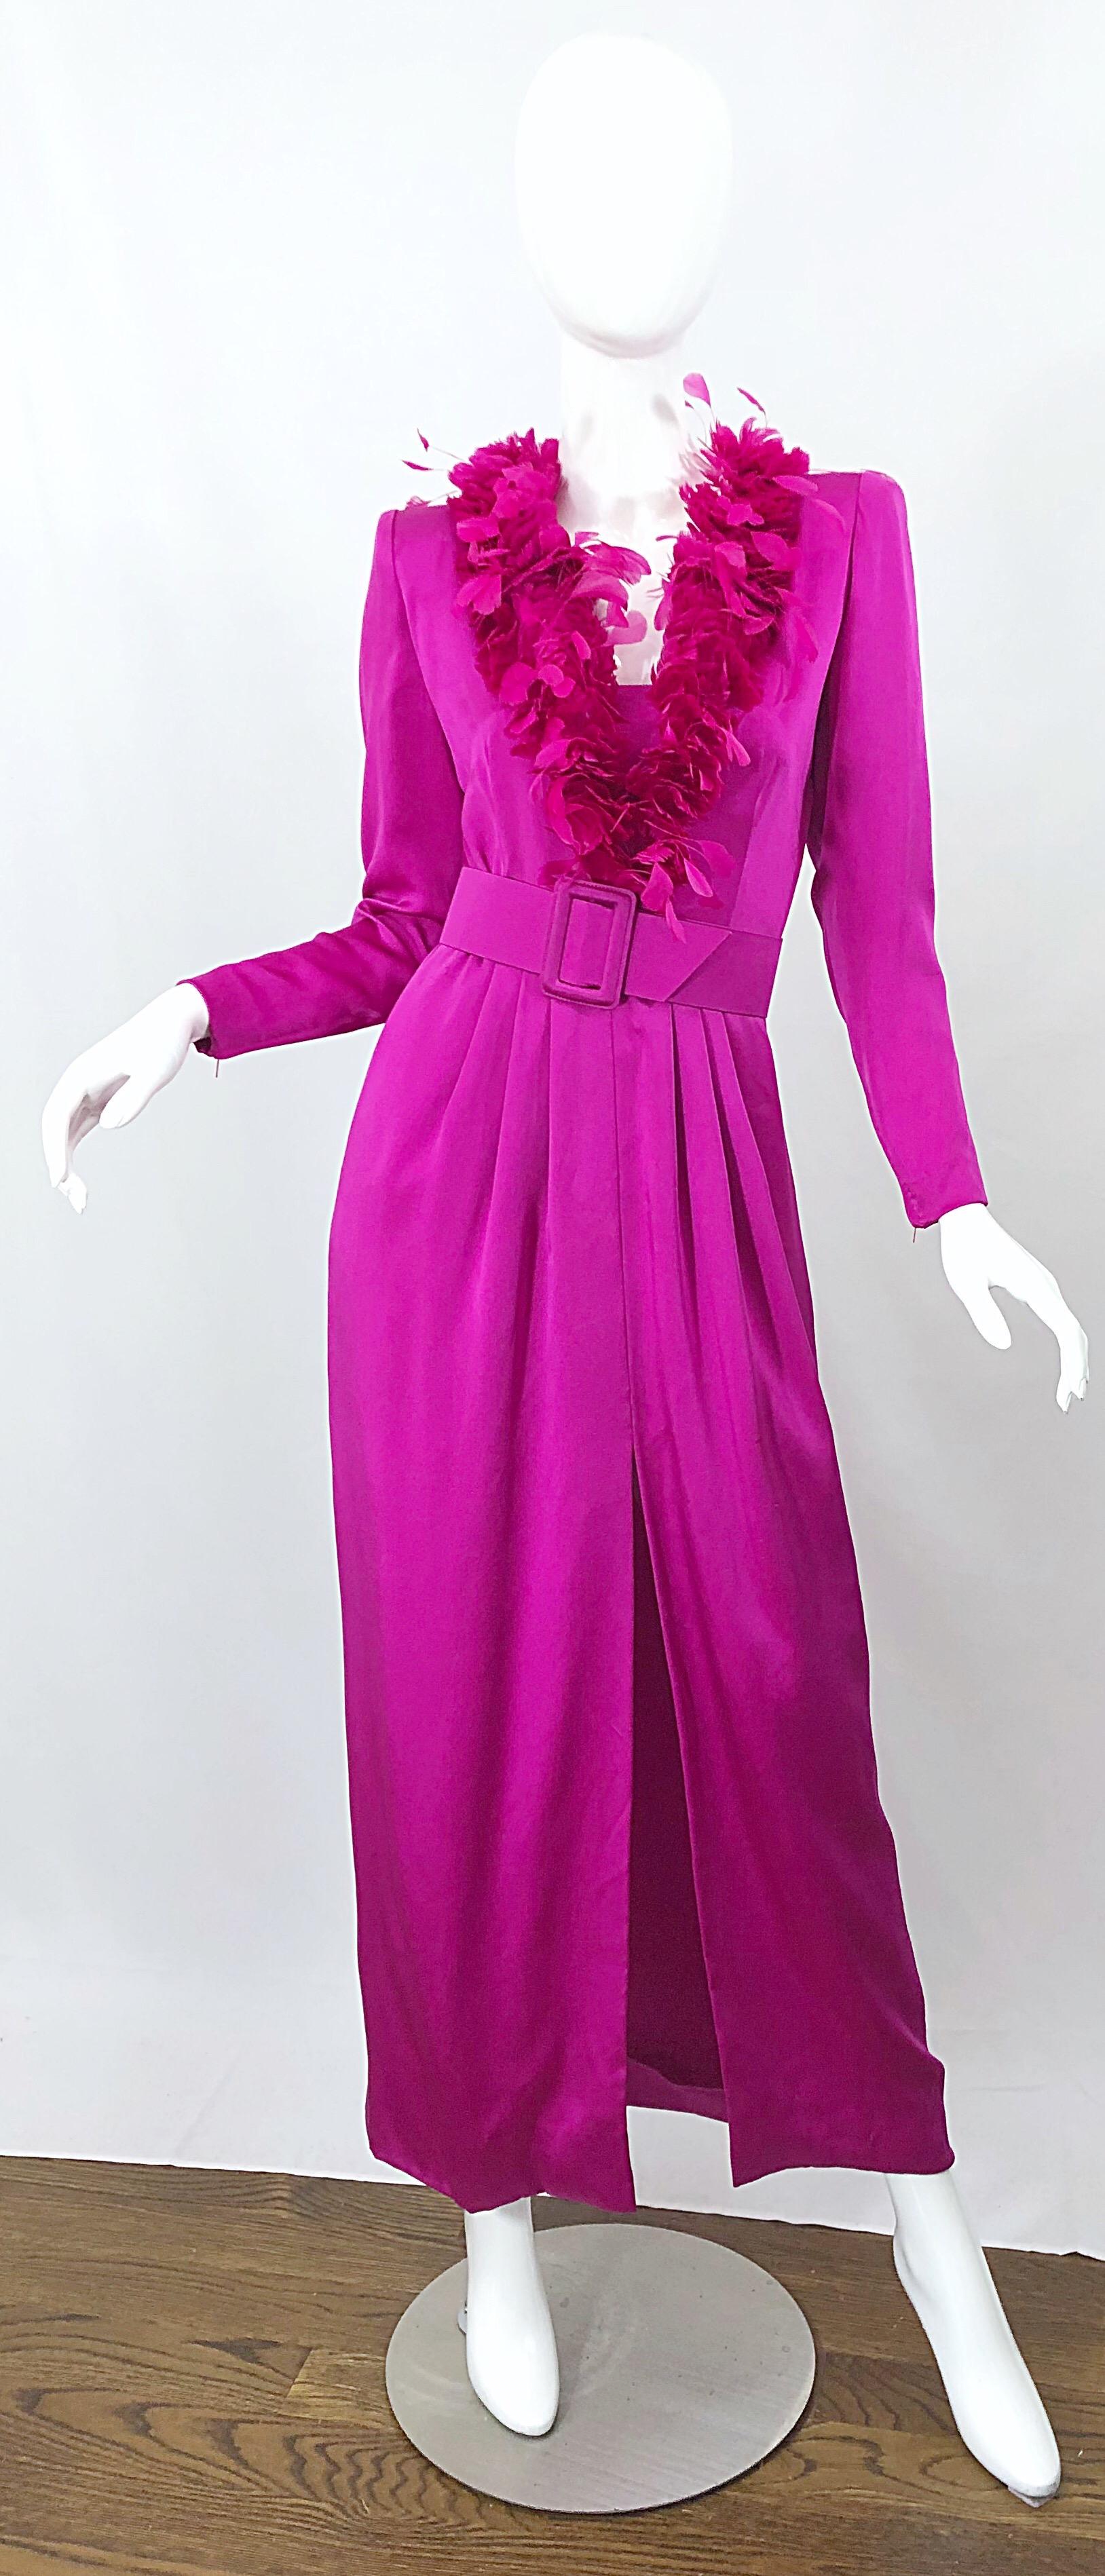 Spectacular vintage early 80s GIVENCHY Couture for Amen Wardy numbered long sleeve hot pink feather encrusted silk gown! This evening dress has everything one could ask for! Hundreds of hand-sewn feathers along the neckline. Bust features a snapped